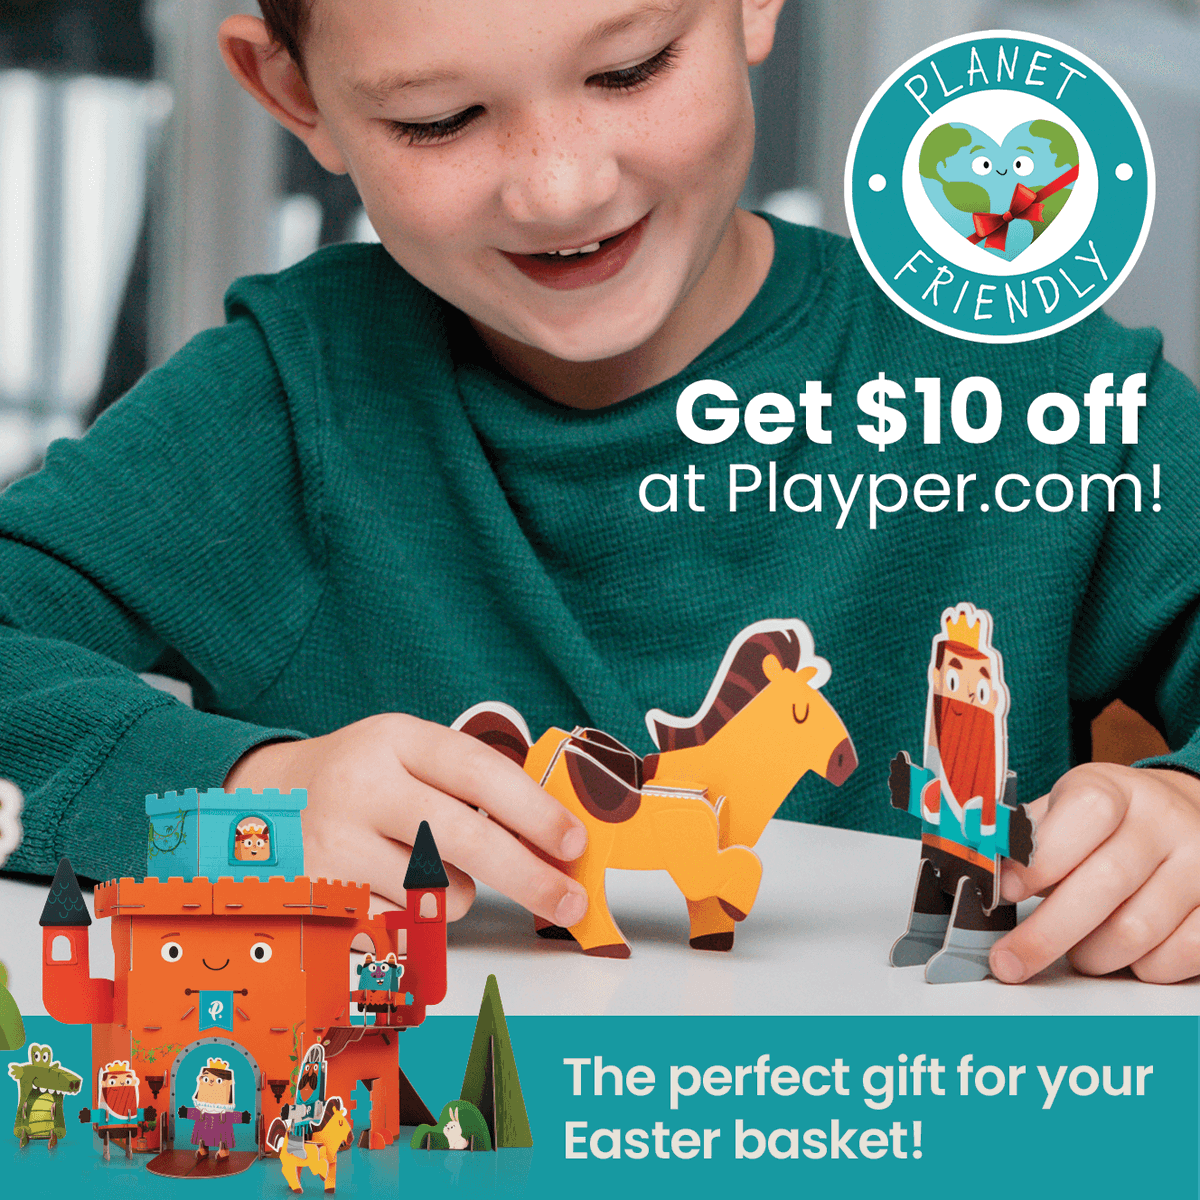 Don't miss out on this Easter special: get $10 off plus free shipping, only at Playper.com! #easter #eastergift #easterbasket #sustainable #plasticfree #recyclable #green #discount #coupon #toy